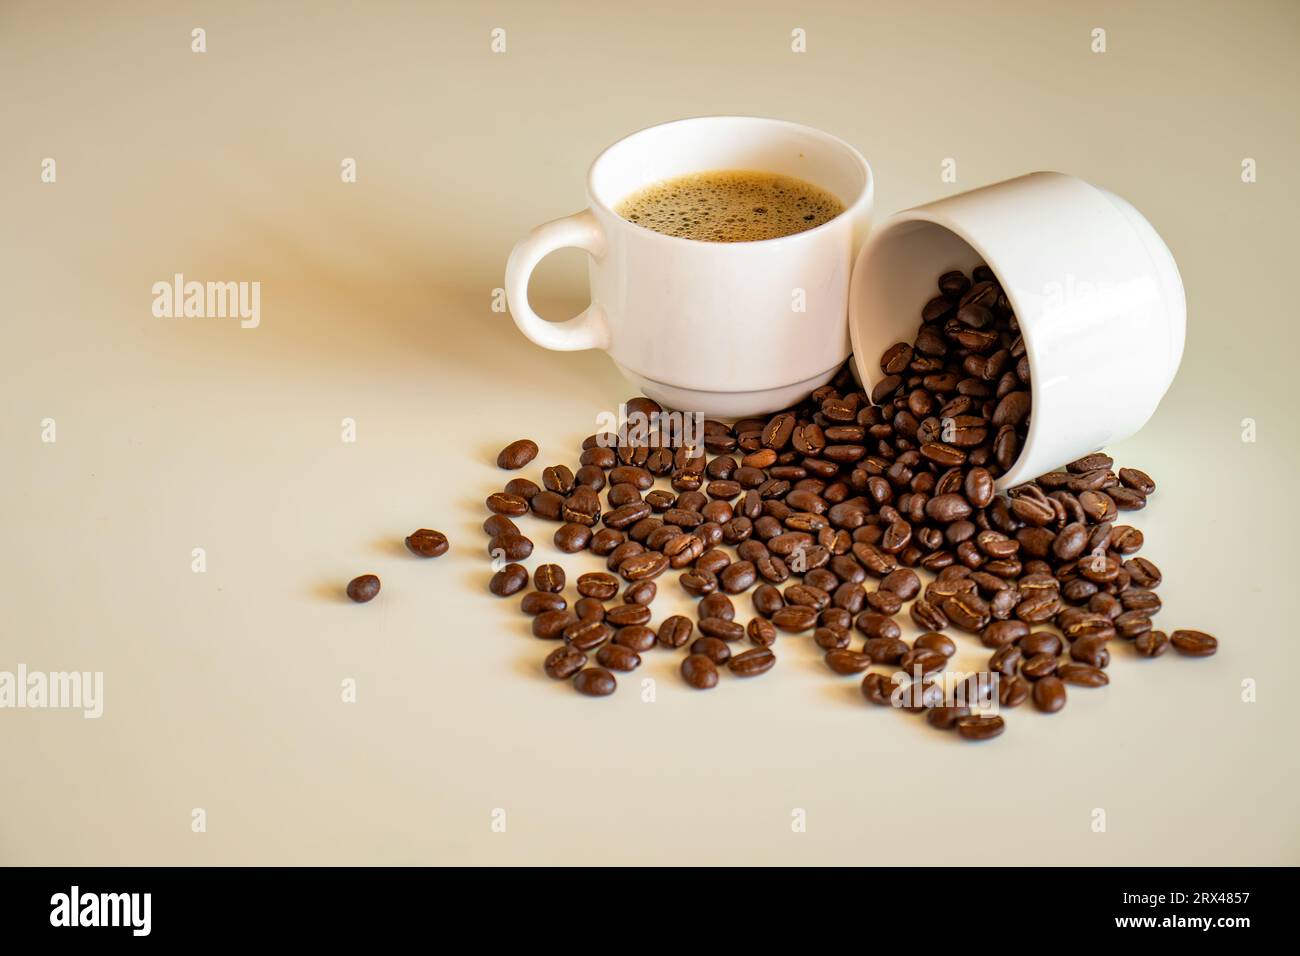 Coffee cups on off white background  full of coffee beans and coffee drink Stock Photo